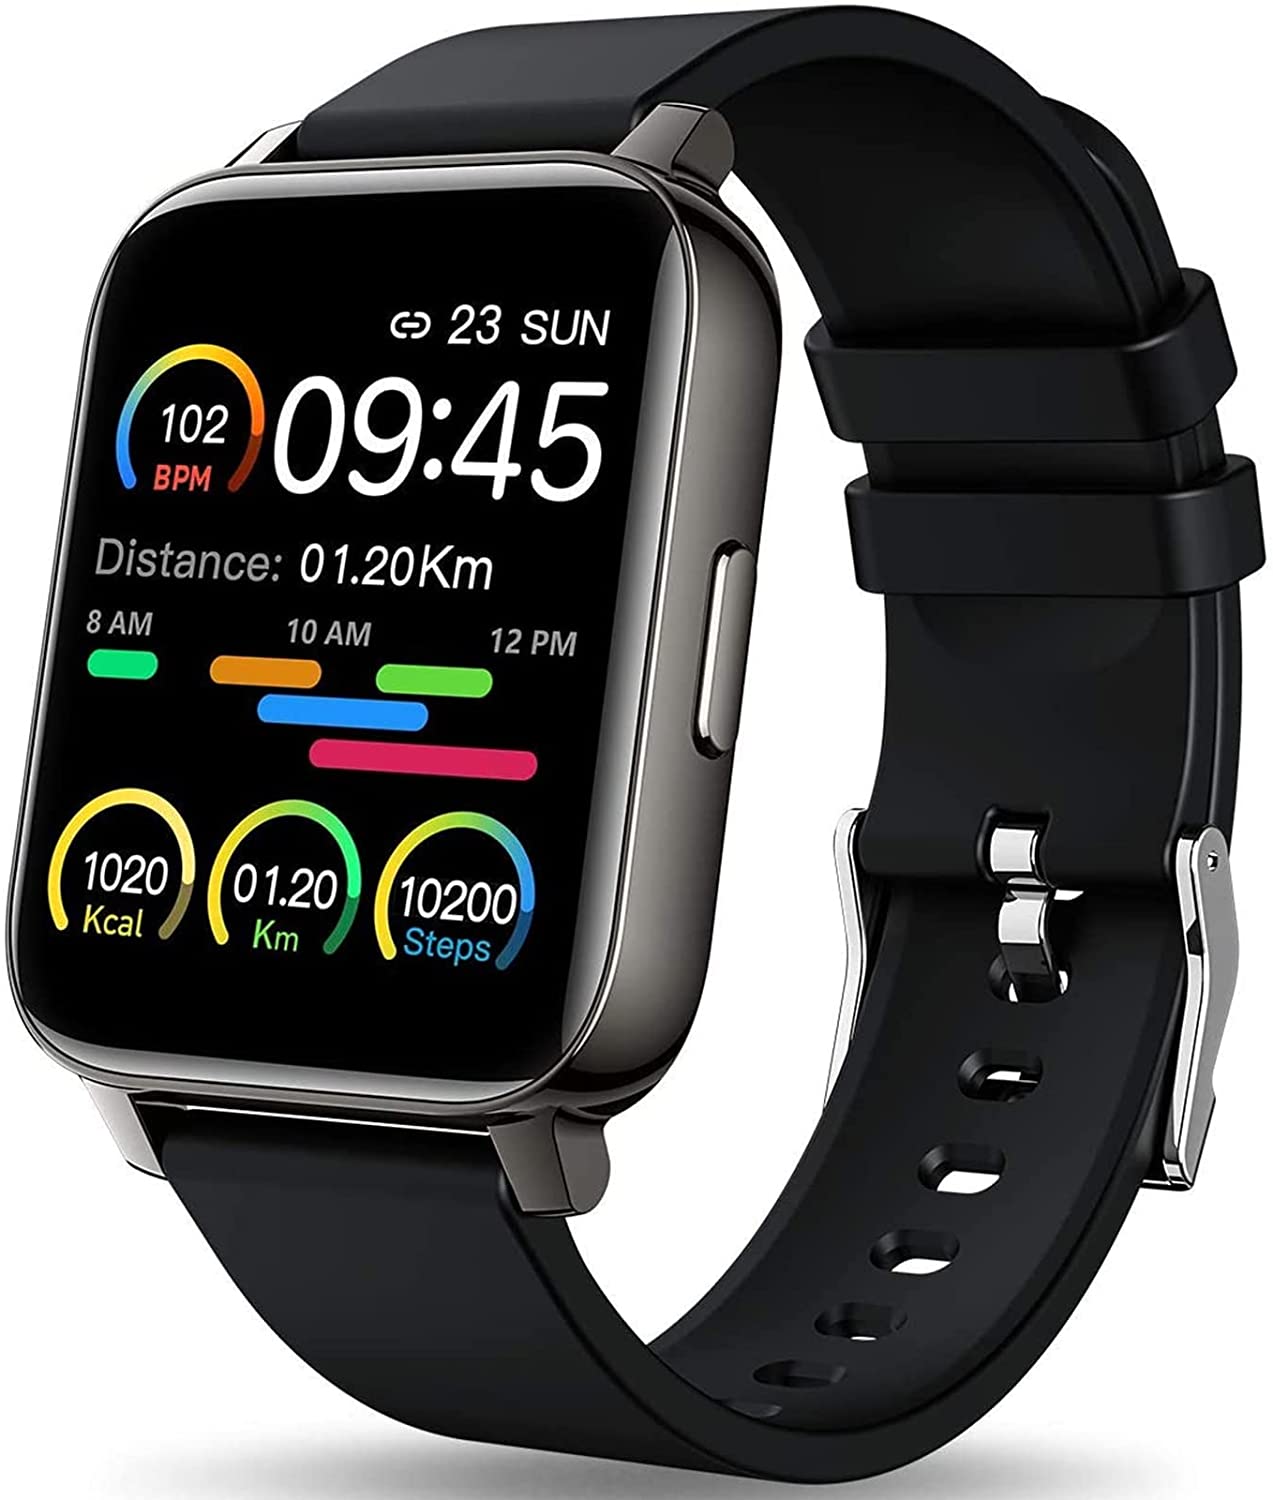 ''MuGo Smart WATCH 1.69'' Fitness Tracker, SmartWATCH with Heart Rate/Sleep Monitor, Calorie/Step Cou